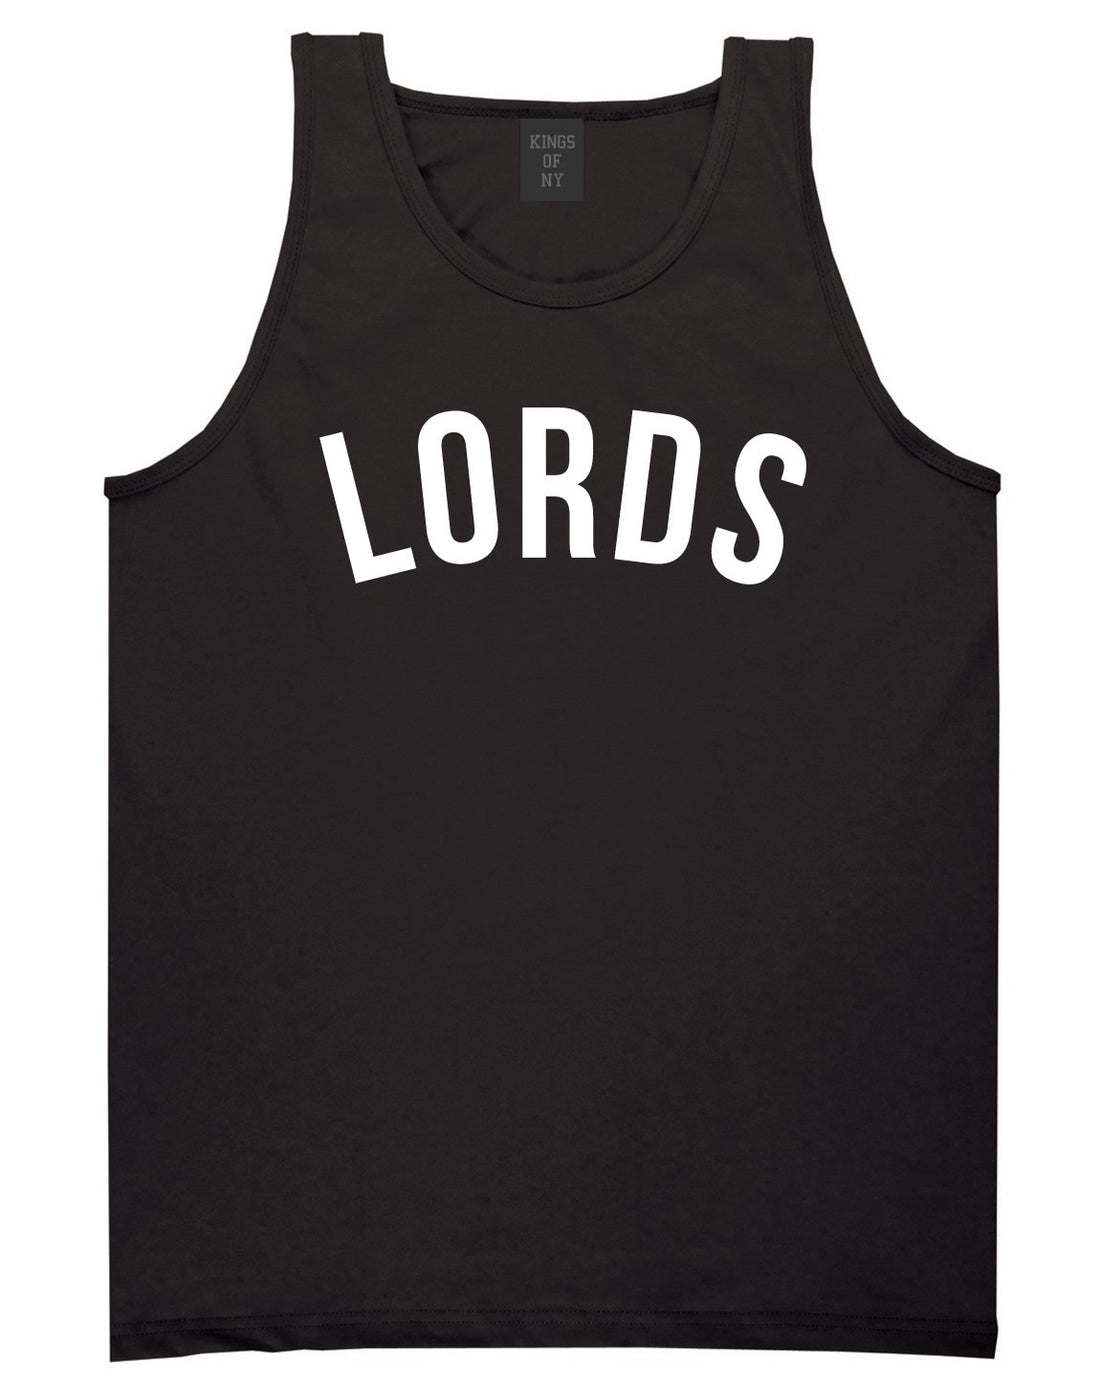 Kings Of NY Lords Tank Top in Black